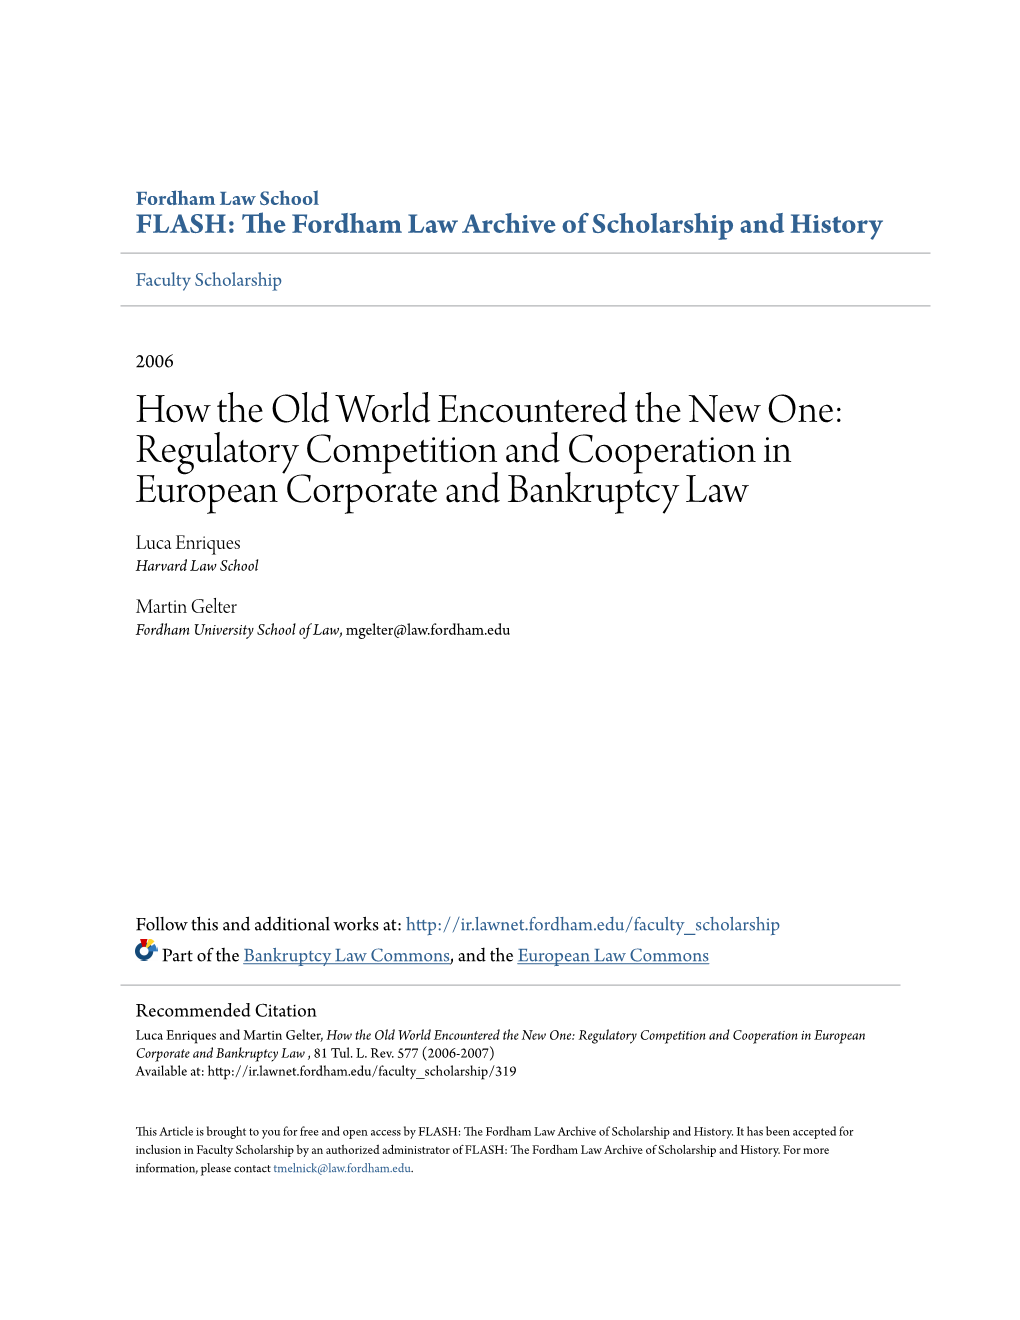 How the Old World Encountered the New One: Regulatory Competition and Cooperation in European Corporate and Bankruptcy Law Luca Enriques Harvard Law School